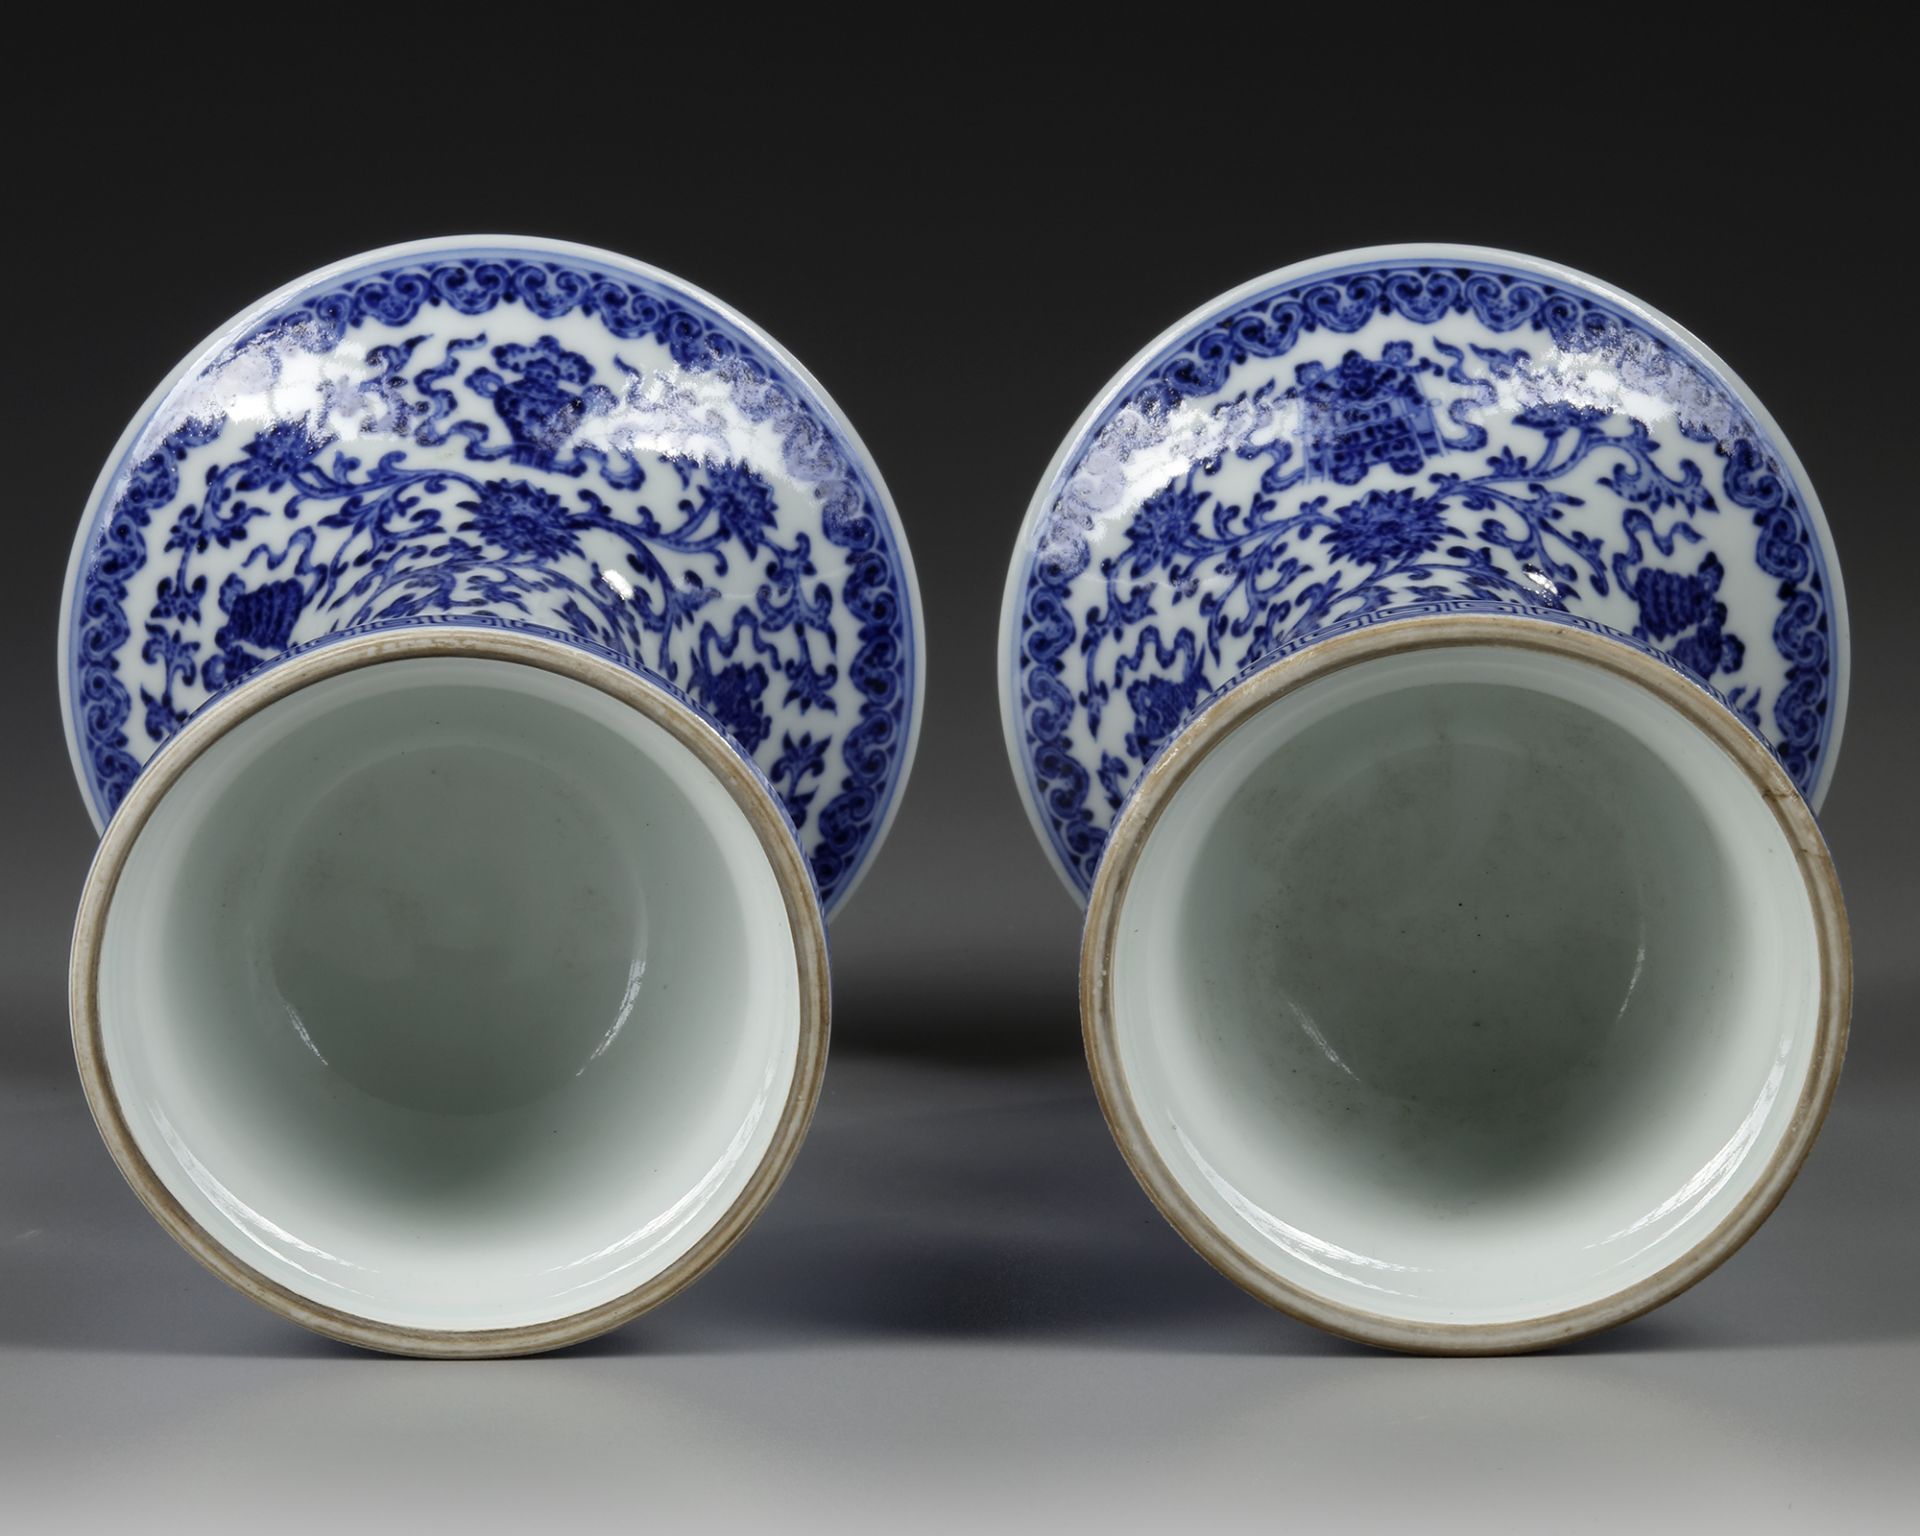 A PAIR OF CHINESE BLUE AND WHITE GU-FORM ALTAR VASES, QING DYNASTY (1644–1911) - Image 7 of 8